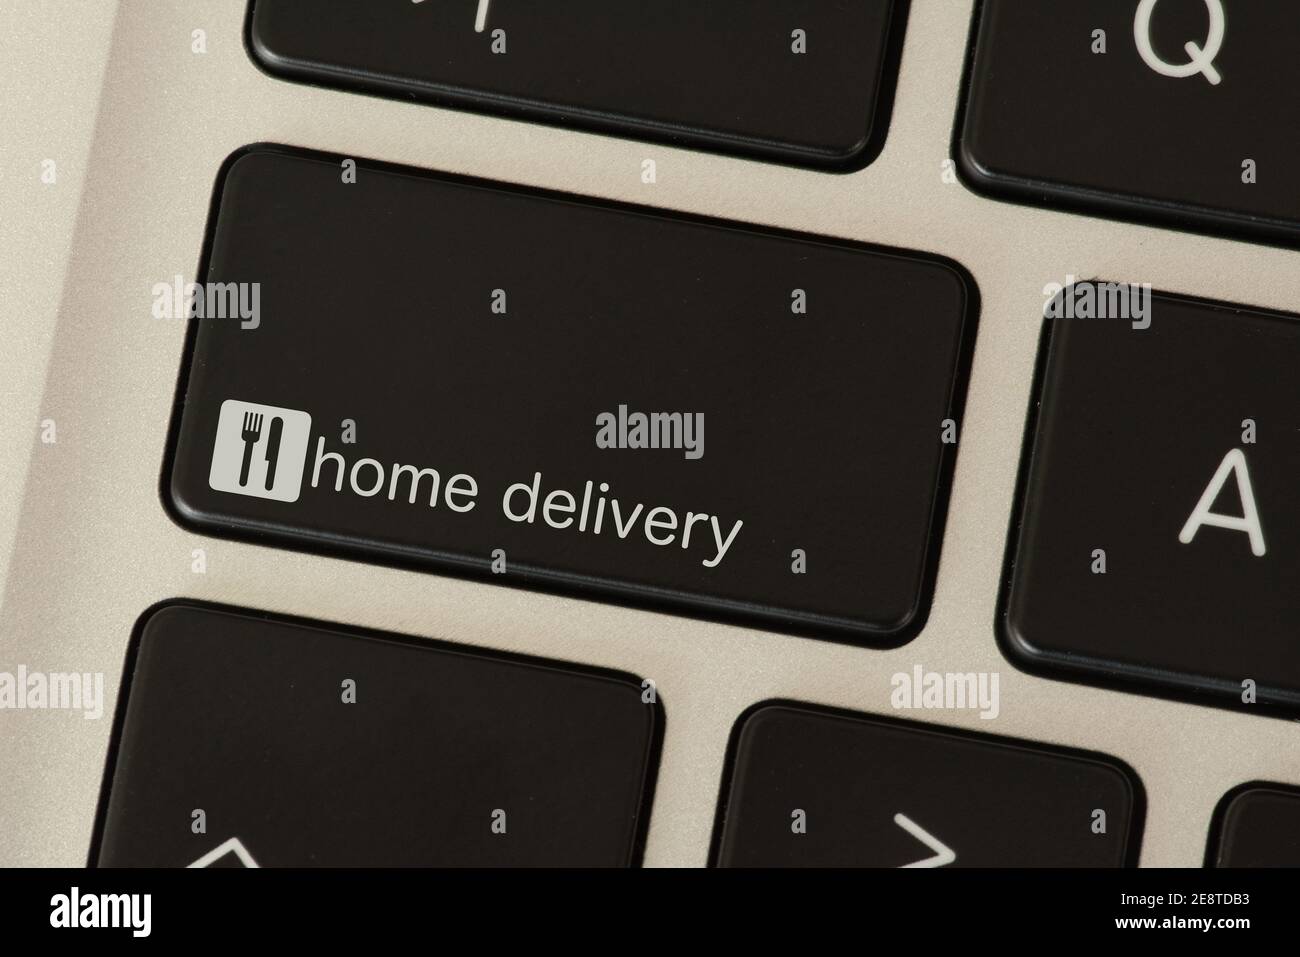 Computer and key for food delivery service Stock Photo